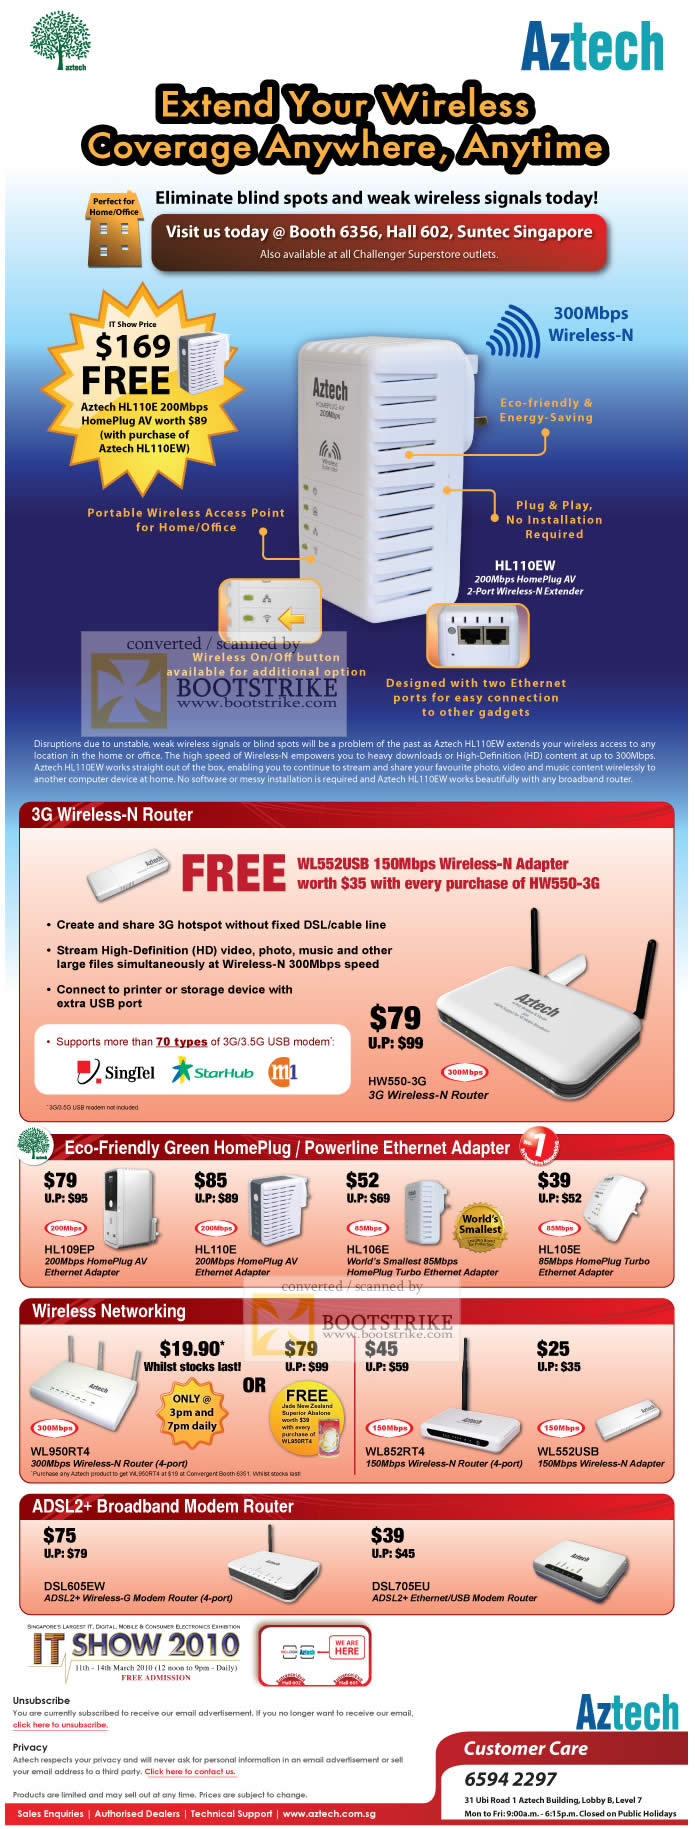 IT Show 2010 price list image brochure of Aztech Portable Wireless Access Point HL110E HomePlug HL110EW 3G Wireless N Router Powerline Ethernet Adapter ADSL